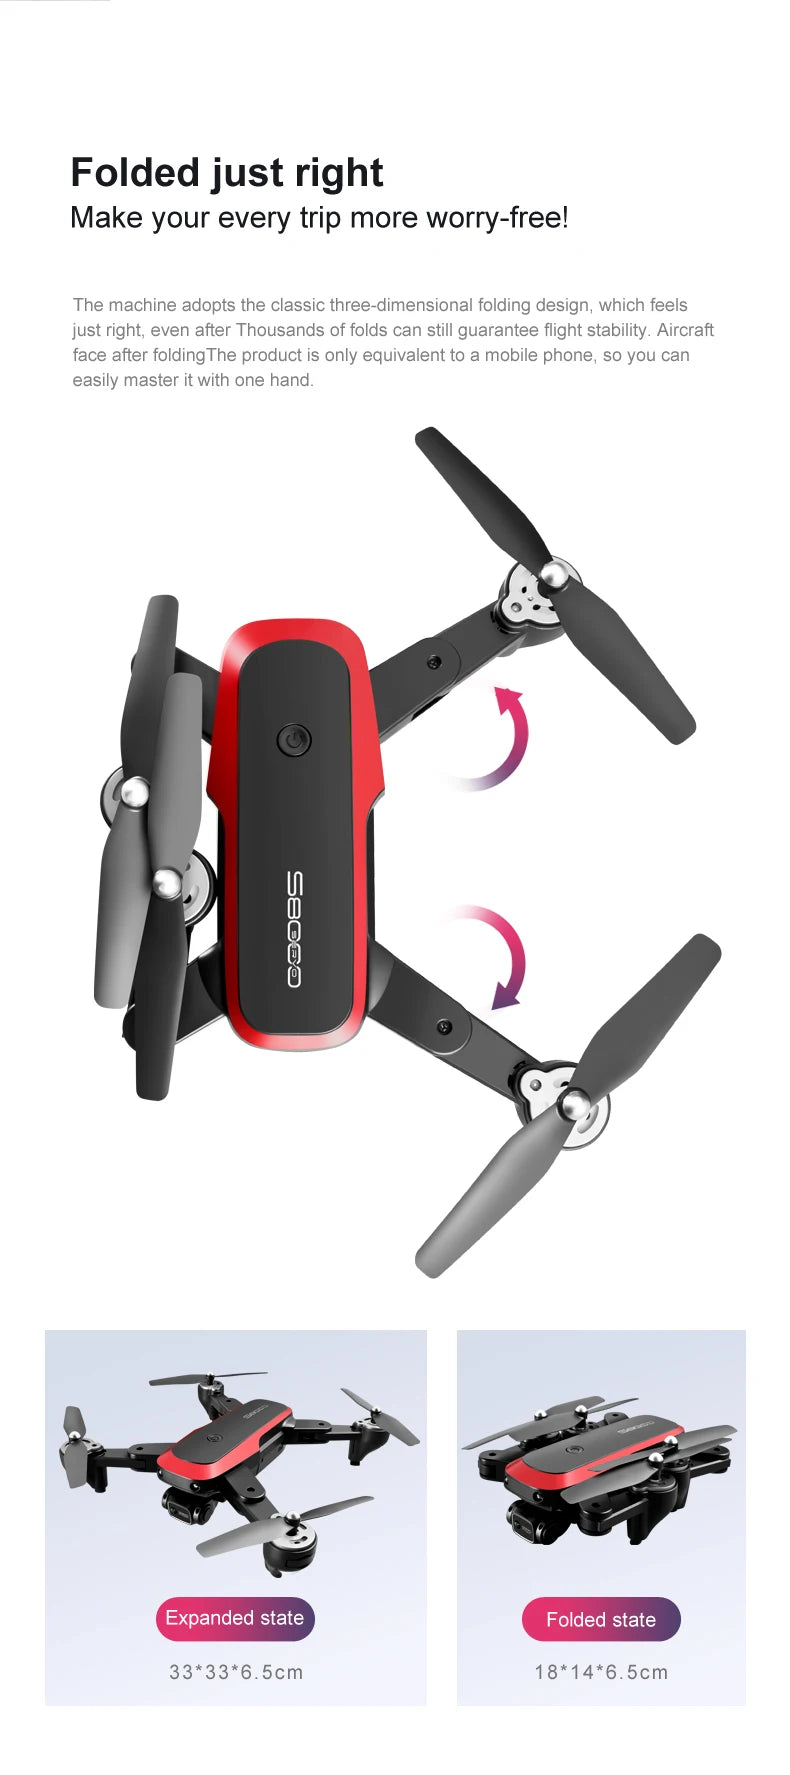 S8000 Drone, folded just right make your every trip more worry-free . the